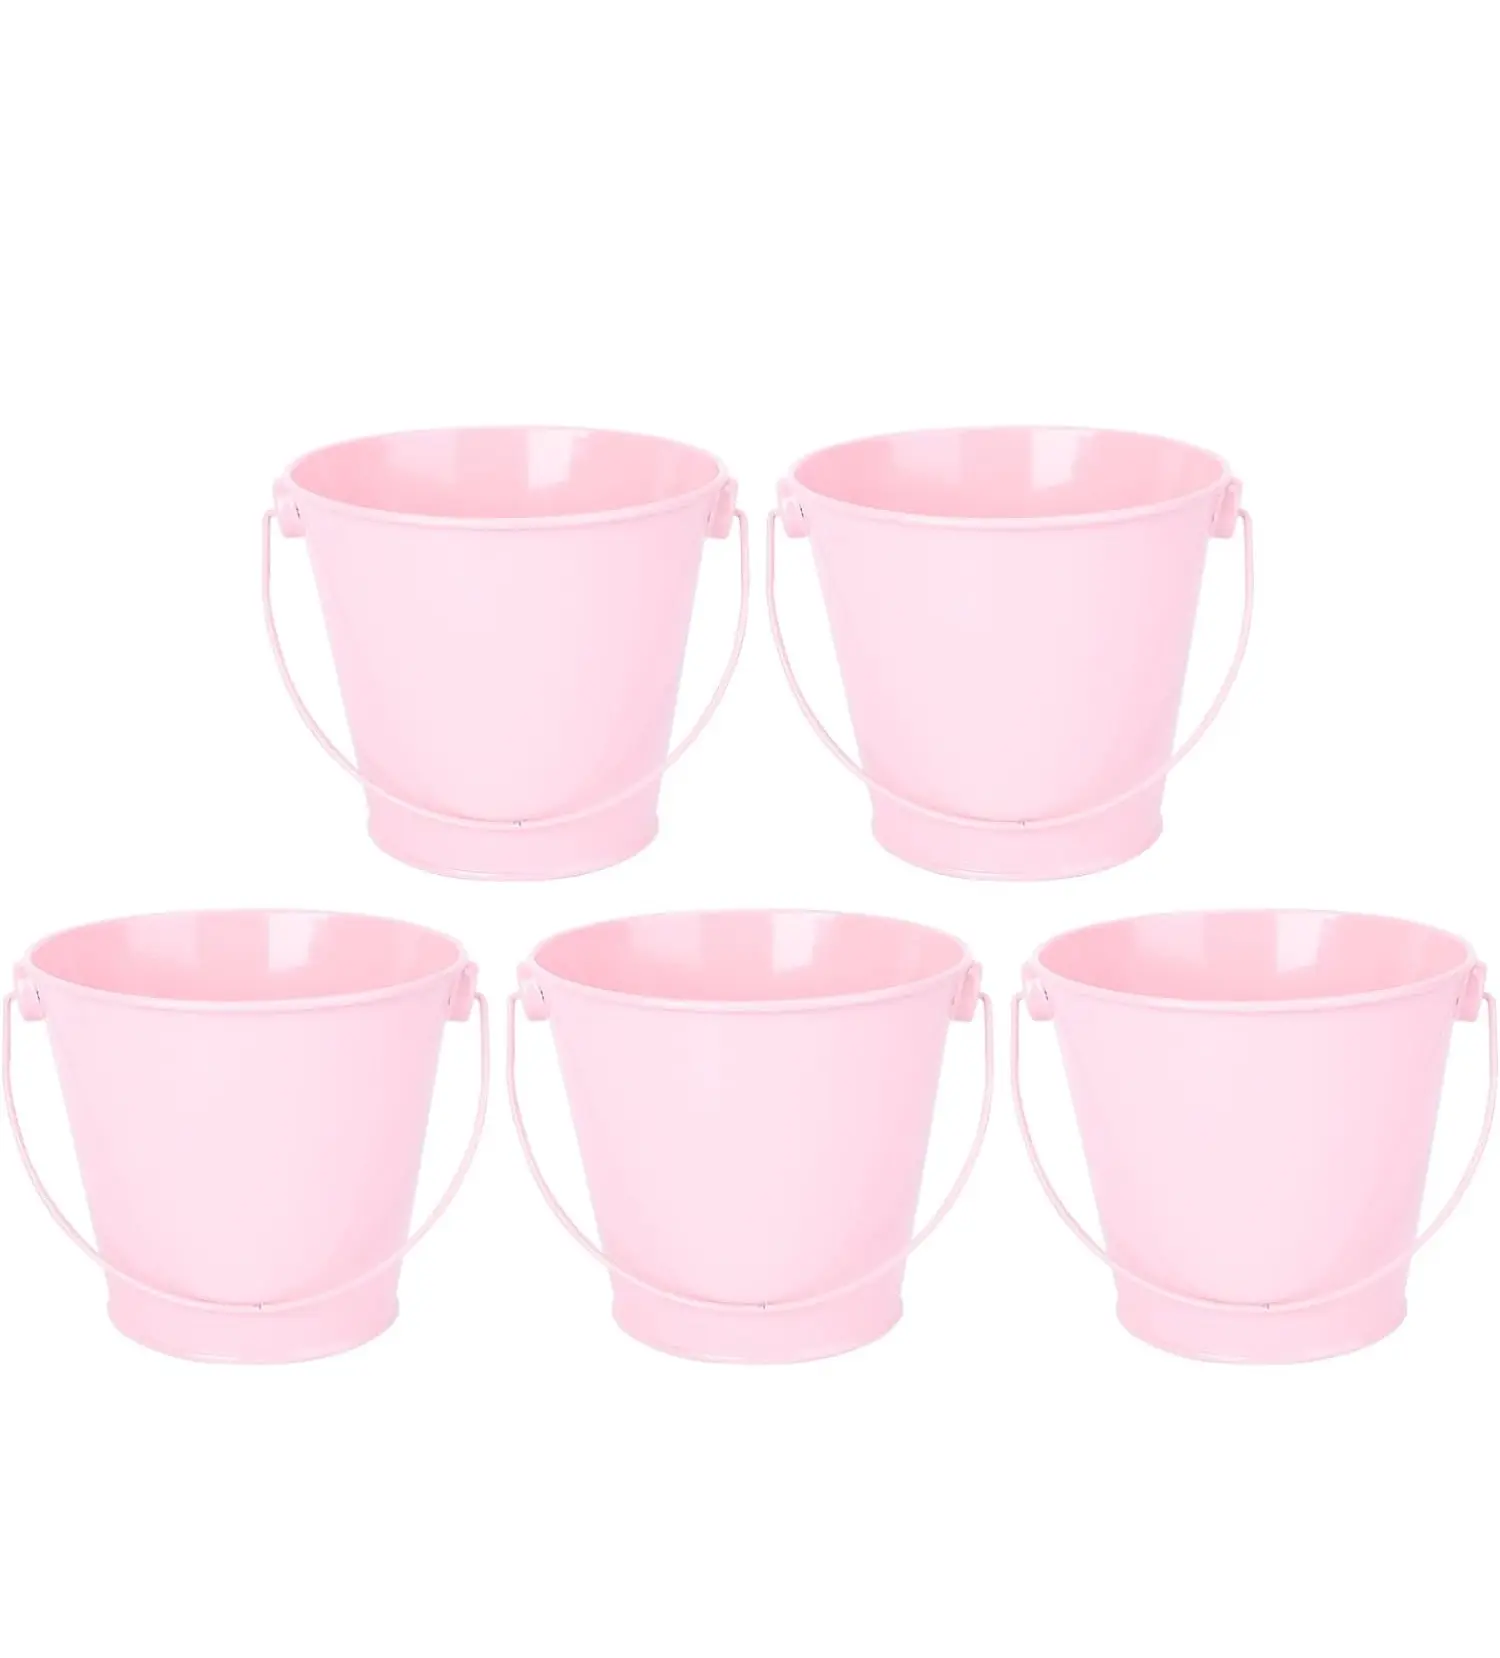 Mini Metal Buckets with Handle Galvanized Bucket Small Tin Bucket for Party Kids Crafts Classroom Favors